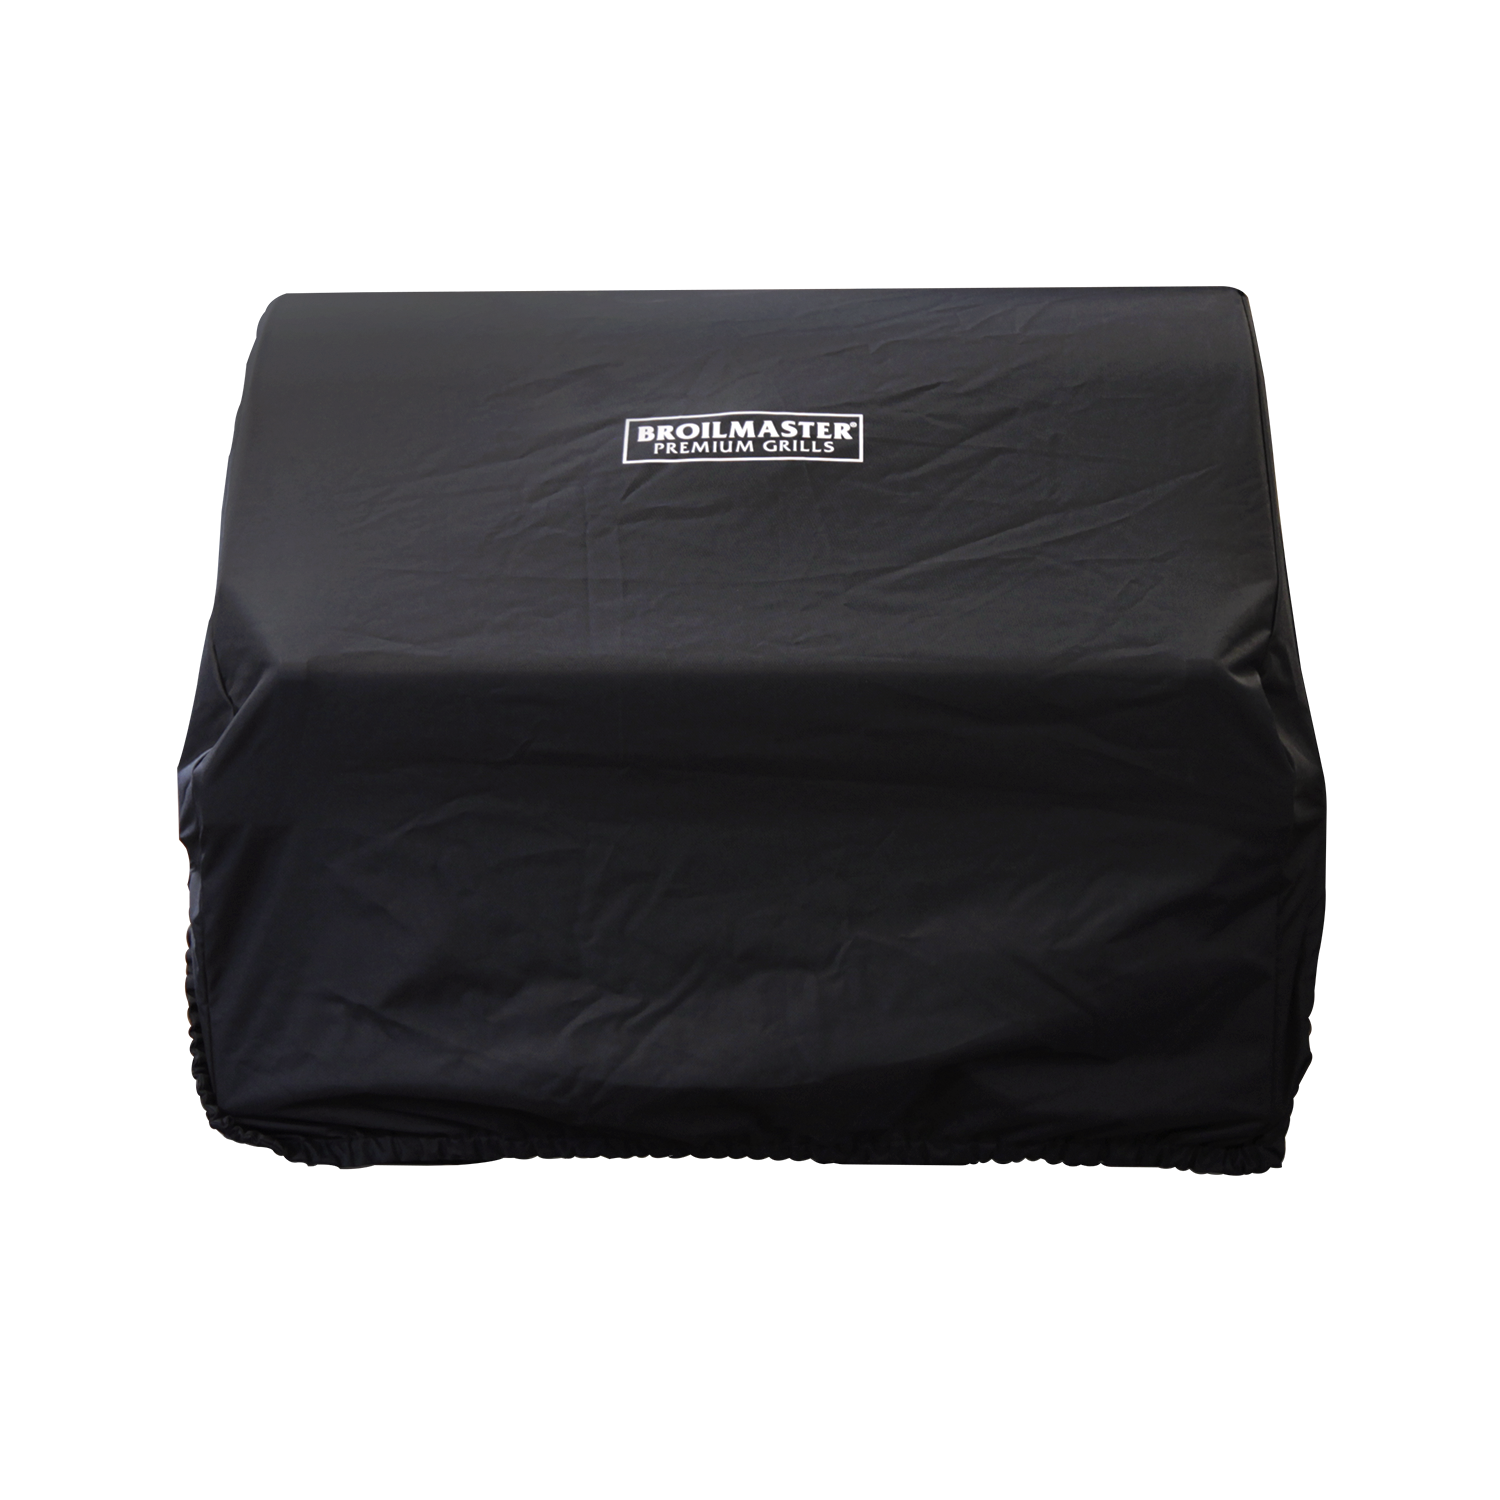 Broilmaster Cover For 42" Grill Built In